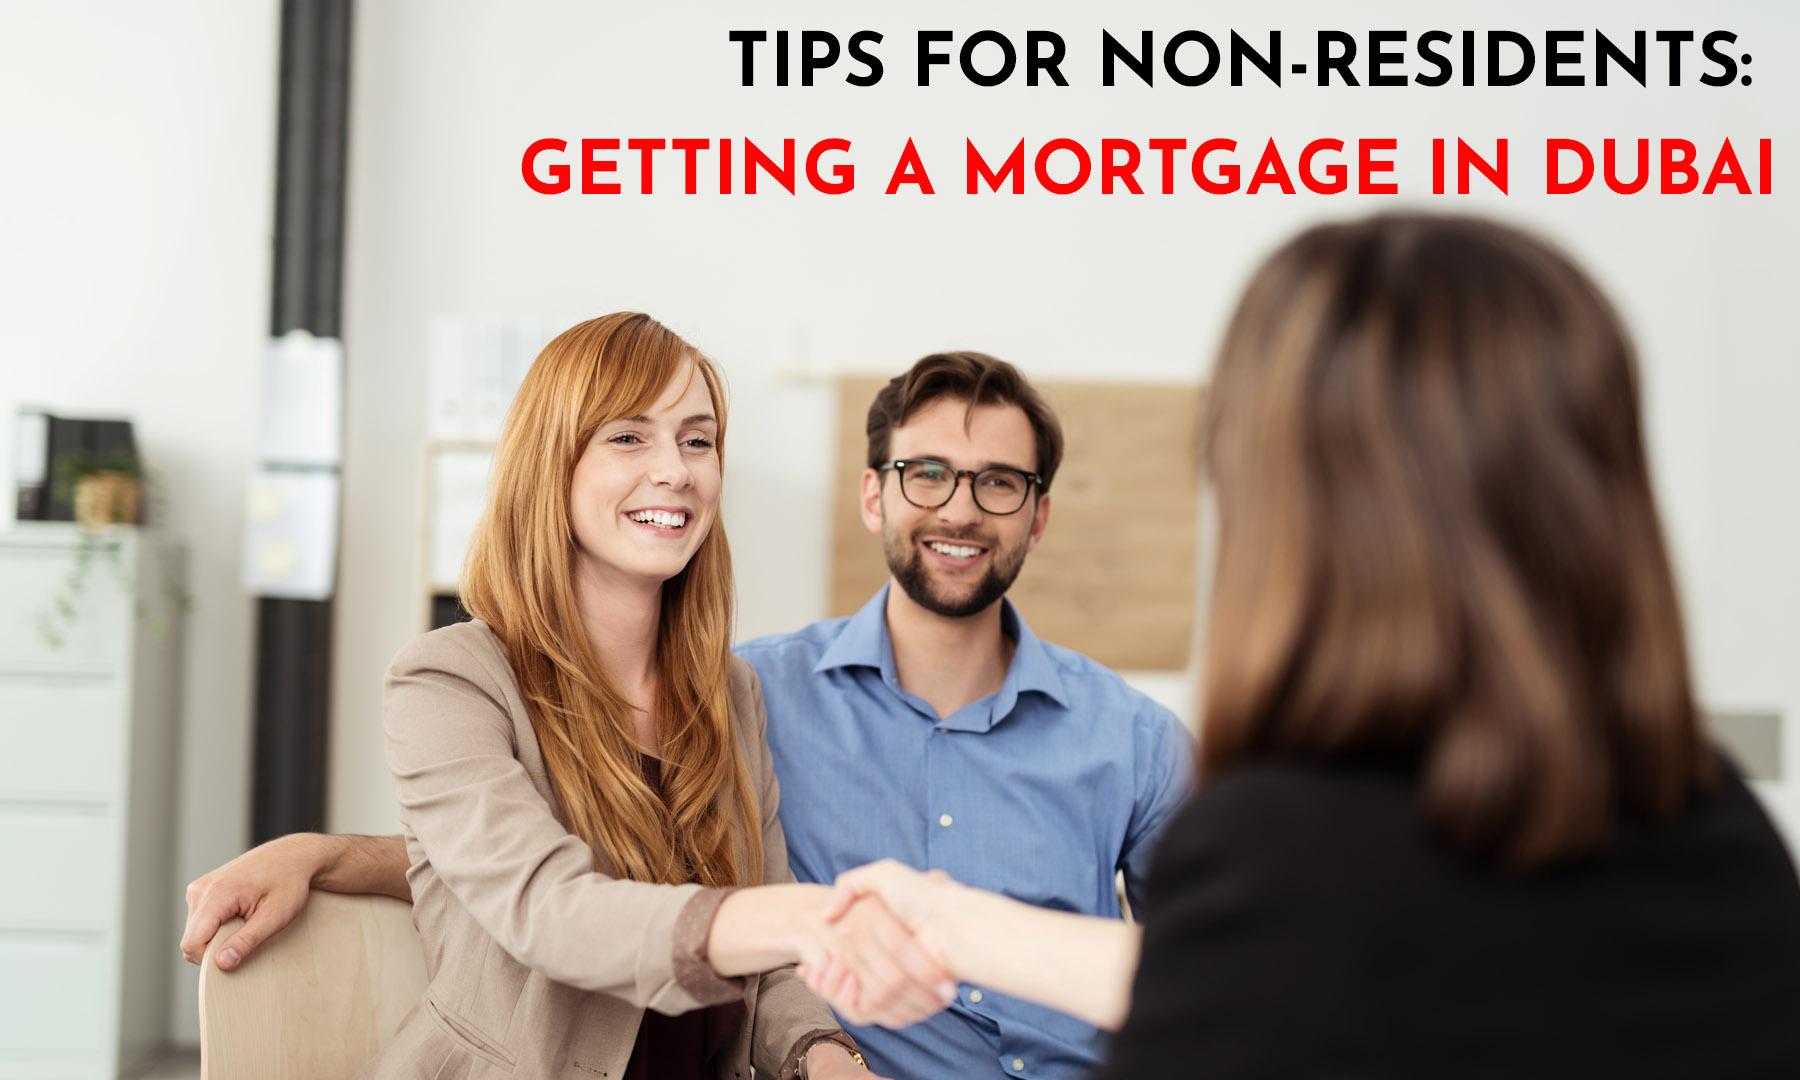 TIPS FOR NON-RESIDENTS: GETTING A MORTGAGE IN DUBAI